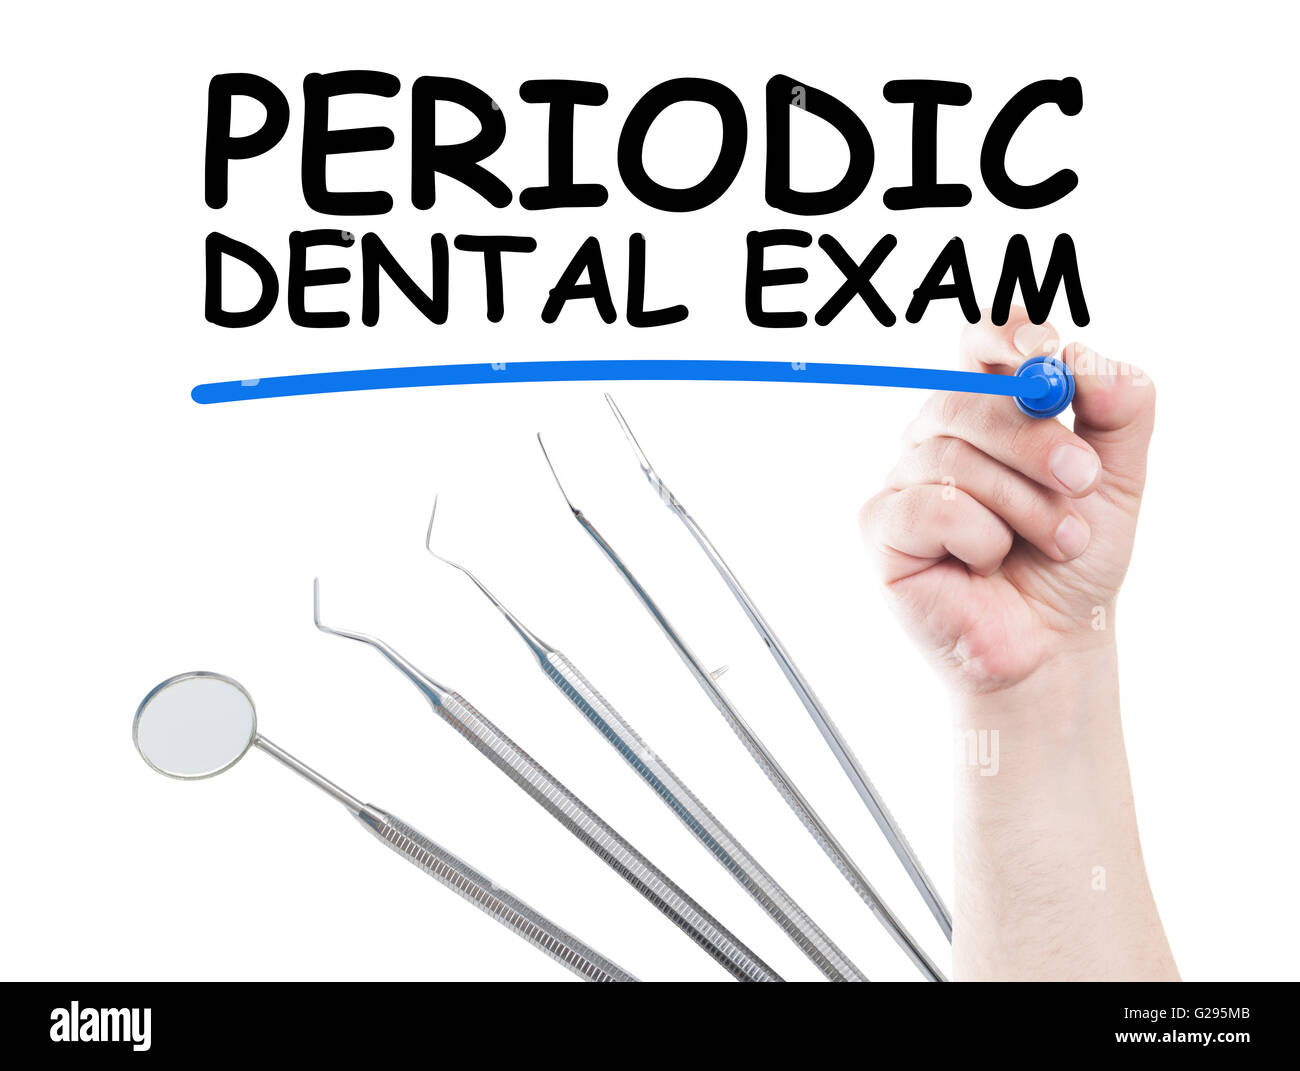 Periodic dental exam concept made on transparent wipe board with a hand holding a marker and usual dentist tools or instruments Stock Photo